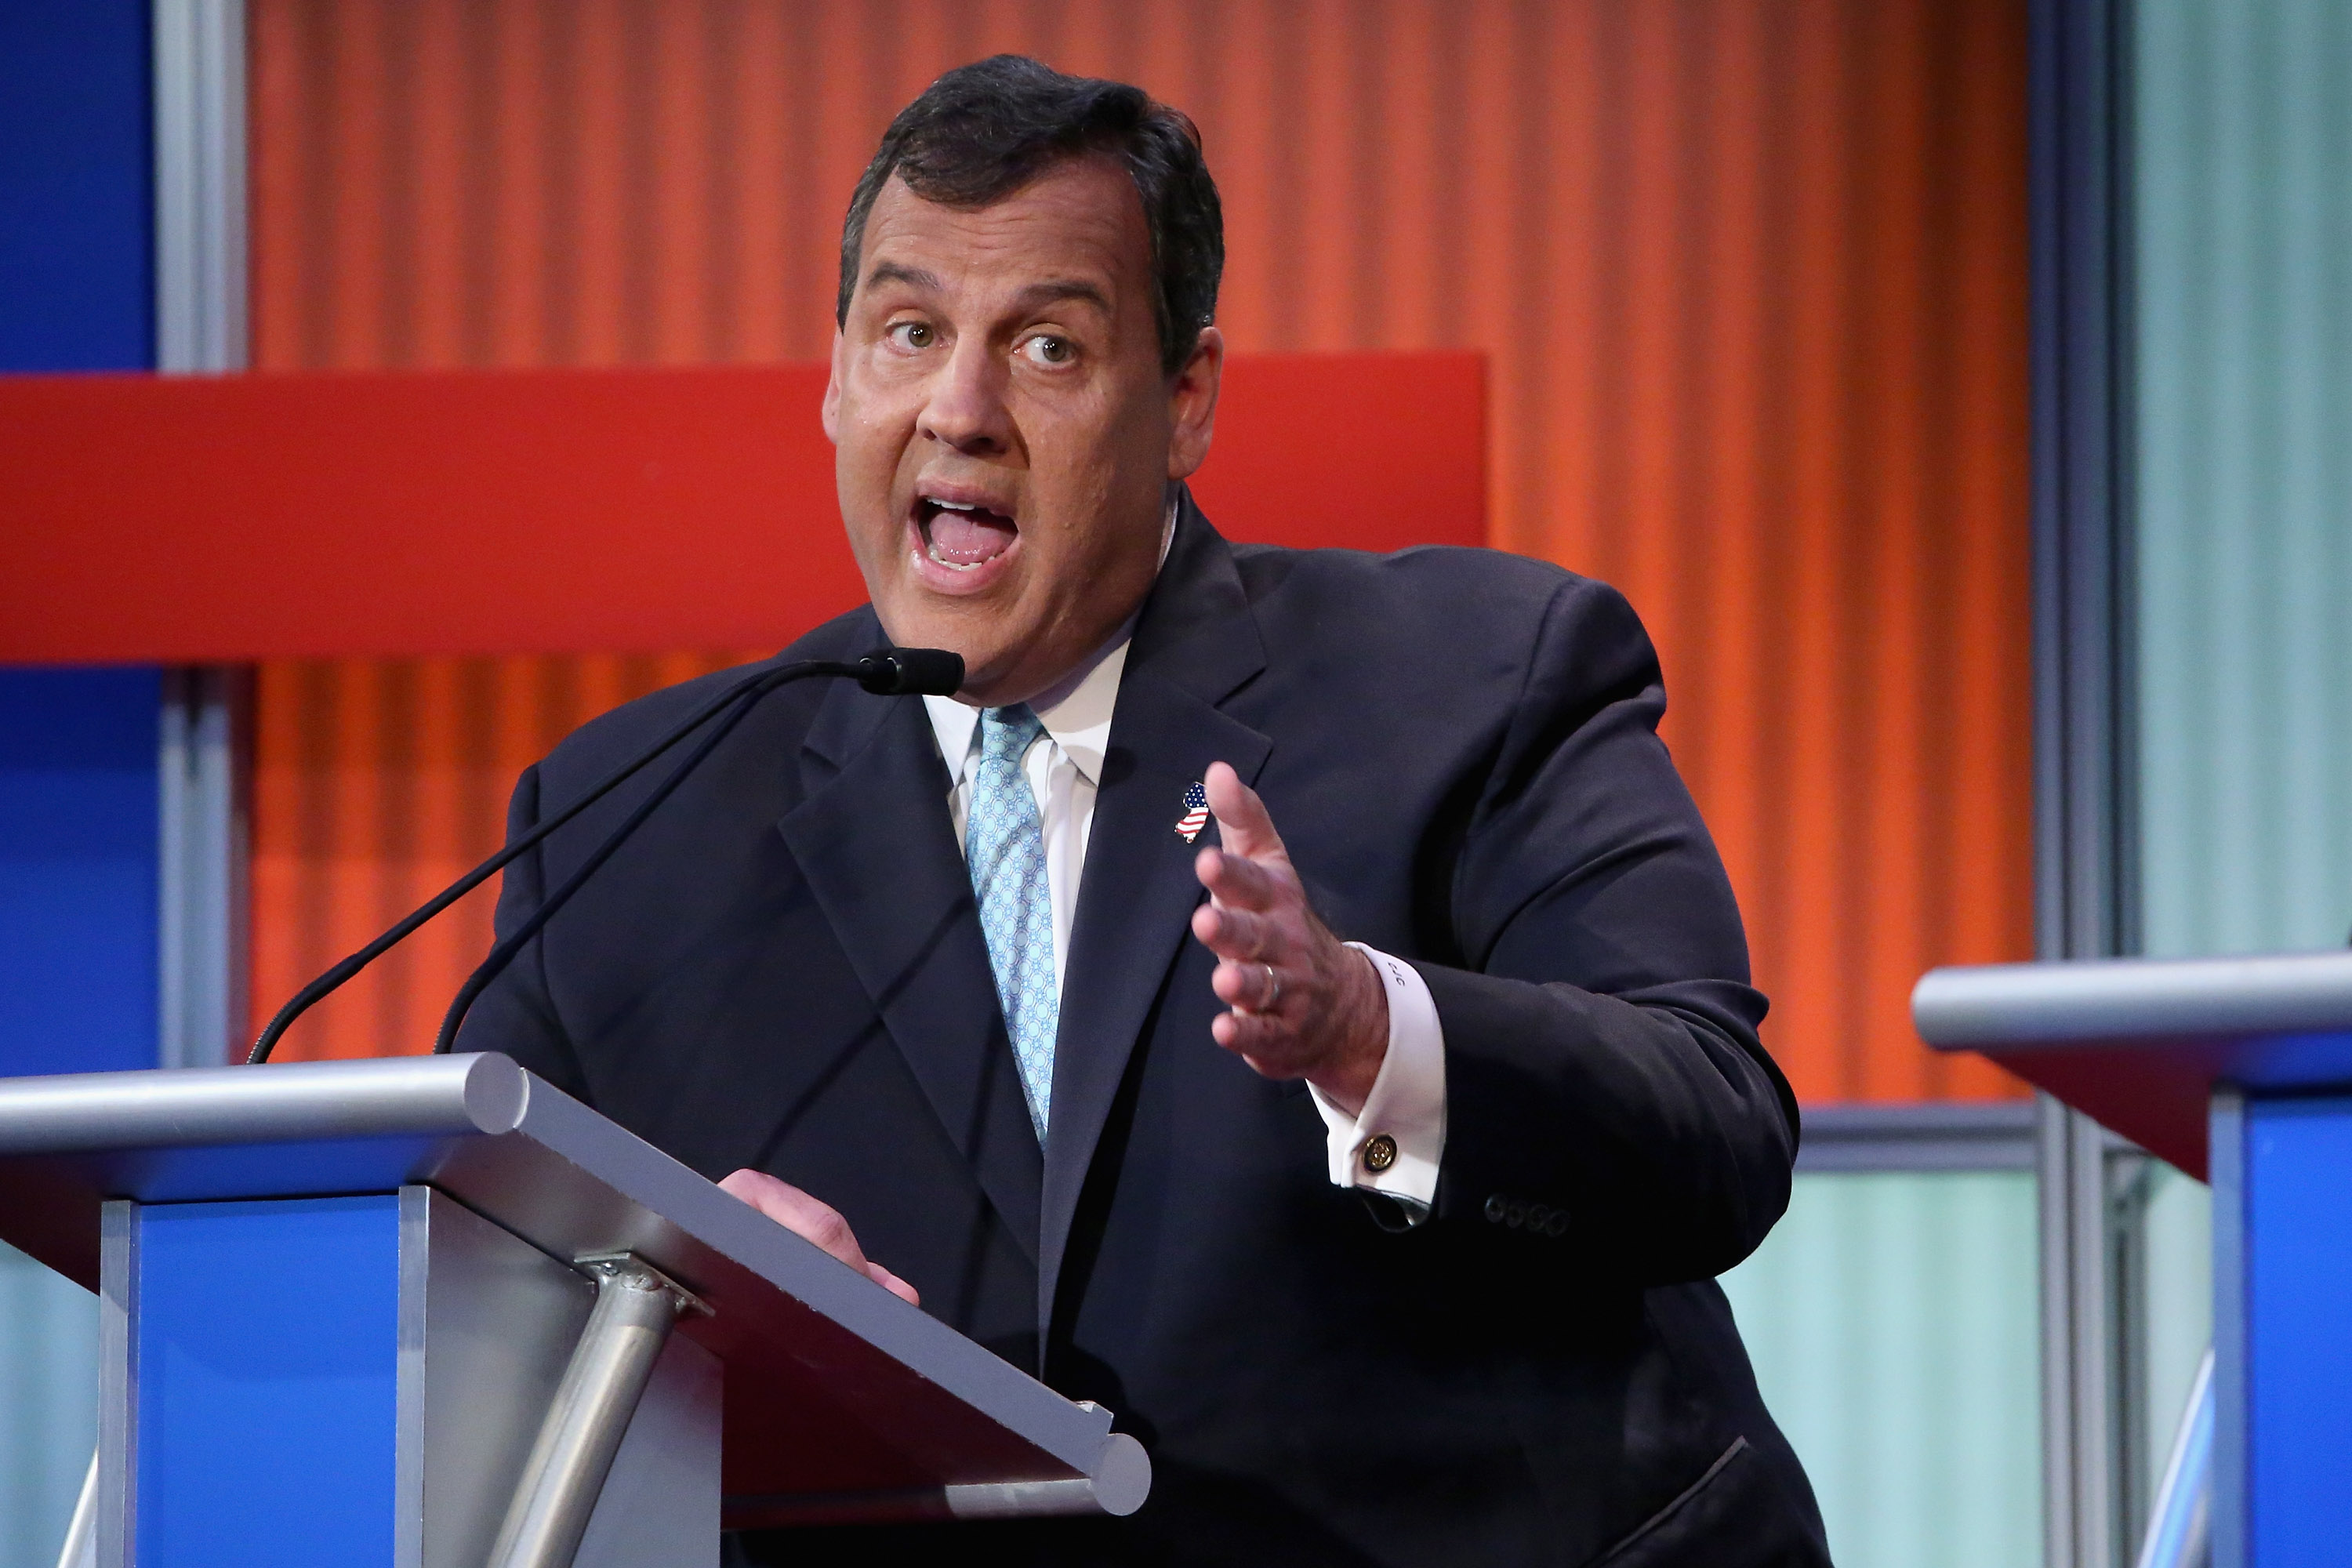 Republican presidential candidate New Jersey Gov. Chris Christie participates in the first prime-time presidential debate hosted by FOX News and Facebook at the Quicken Loans Arena August 6, 2015 in Cleveland, Ohio.